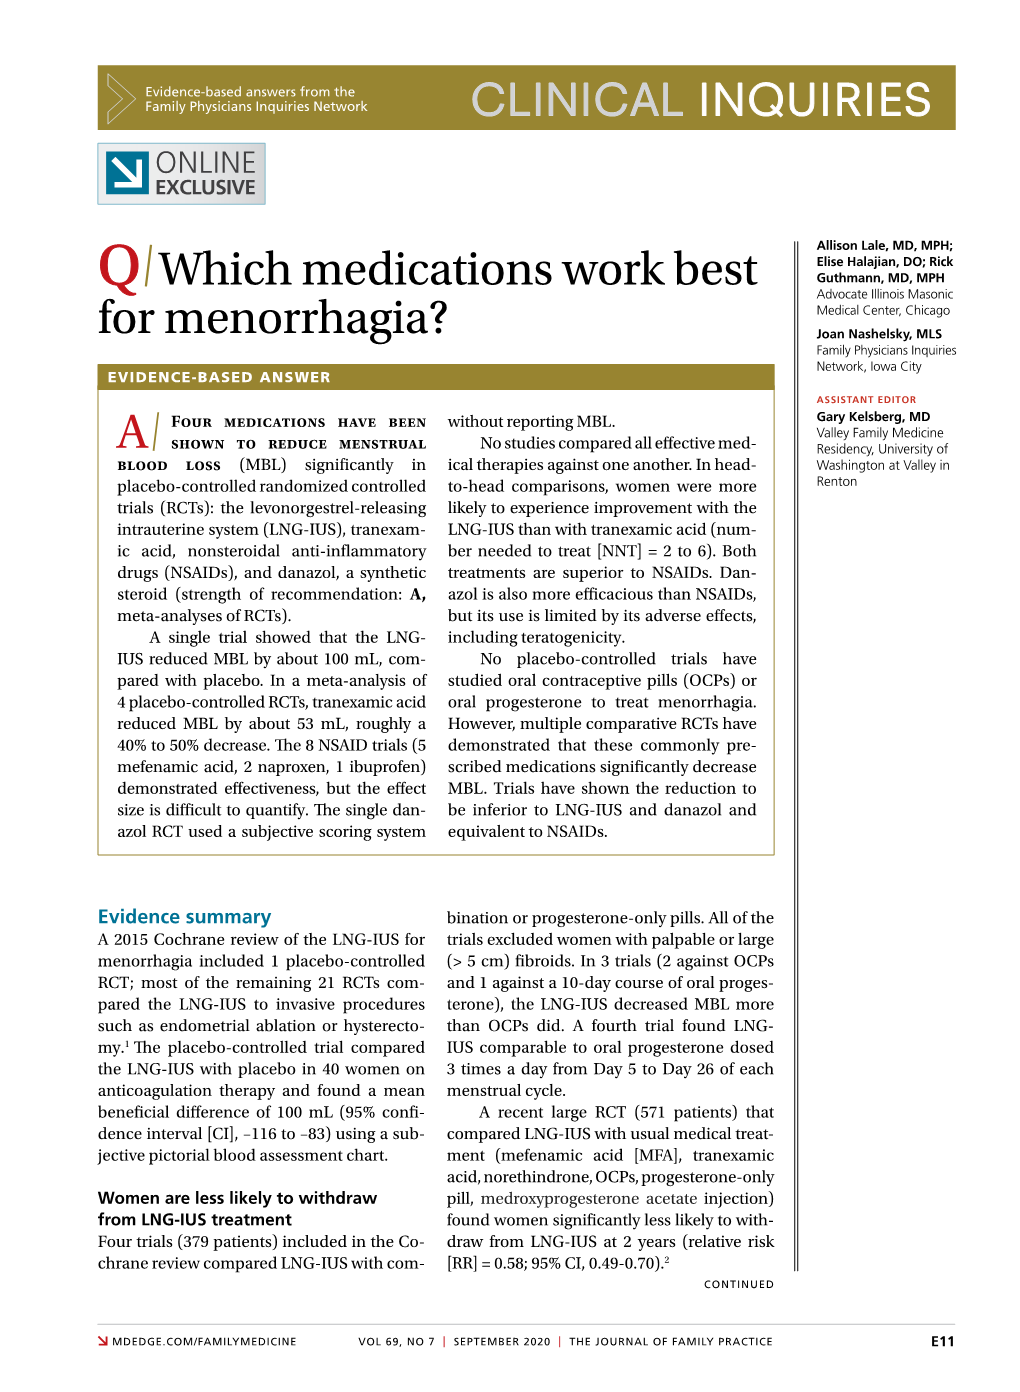 Q Which Medications Work Best for Menorrhagia?